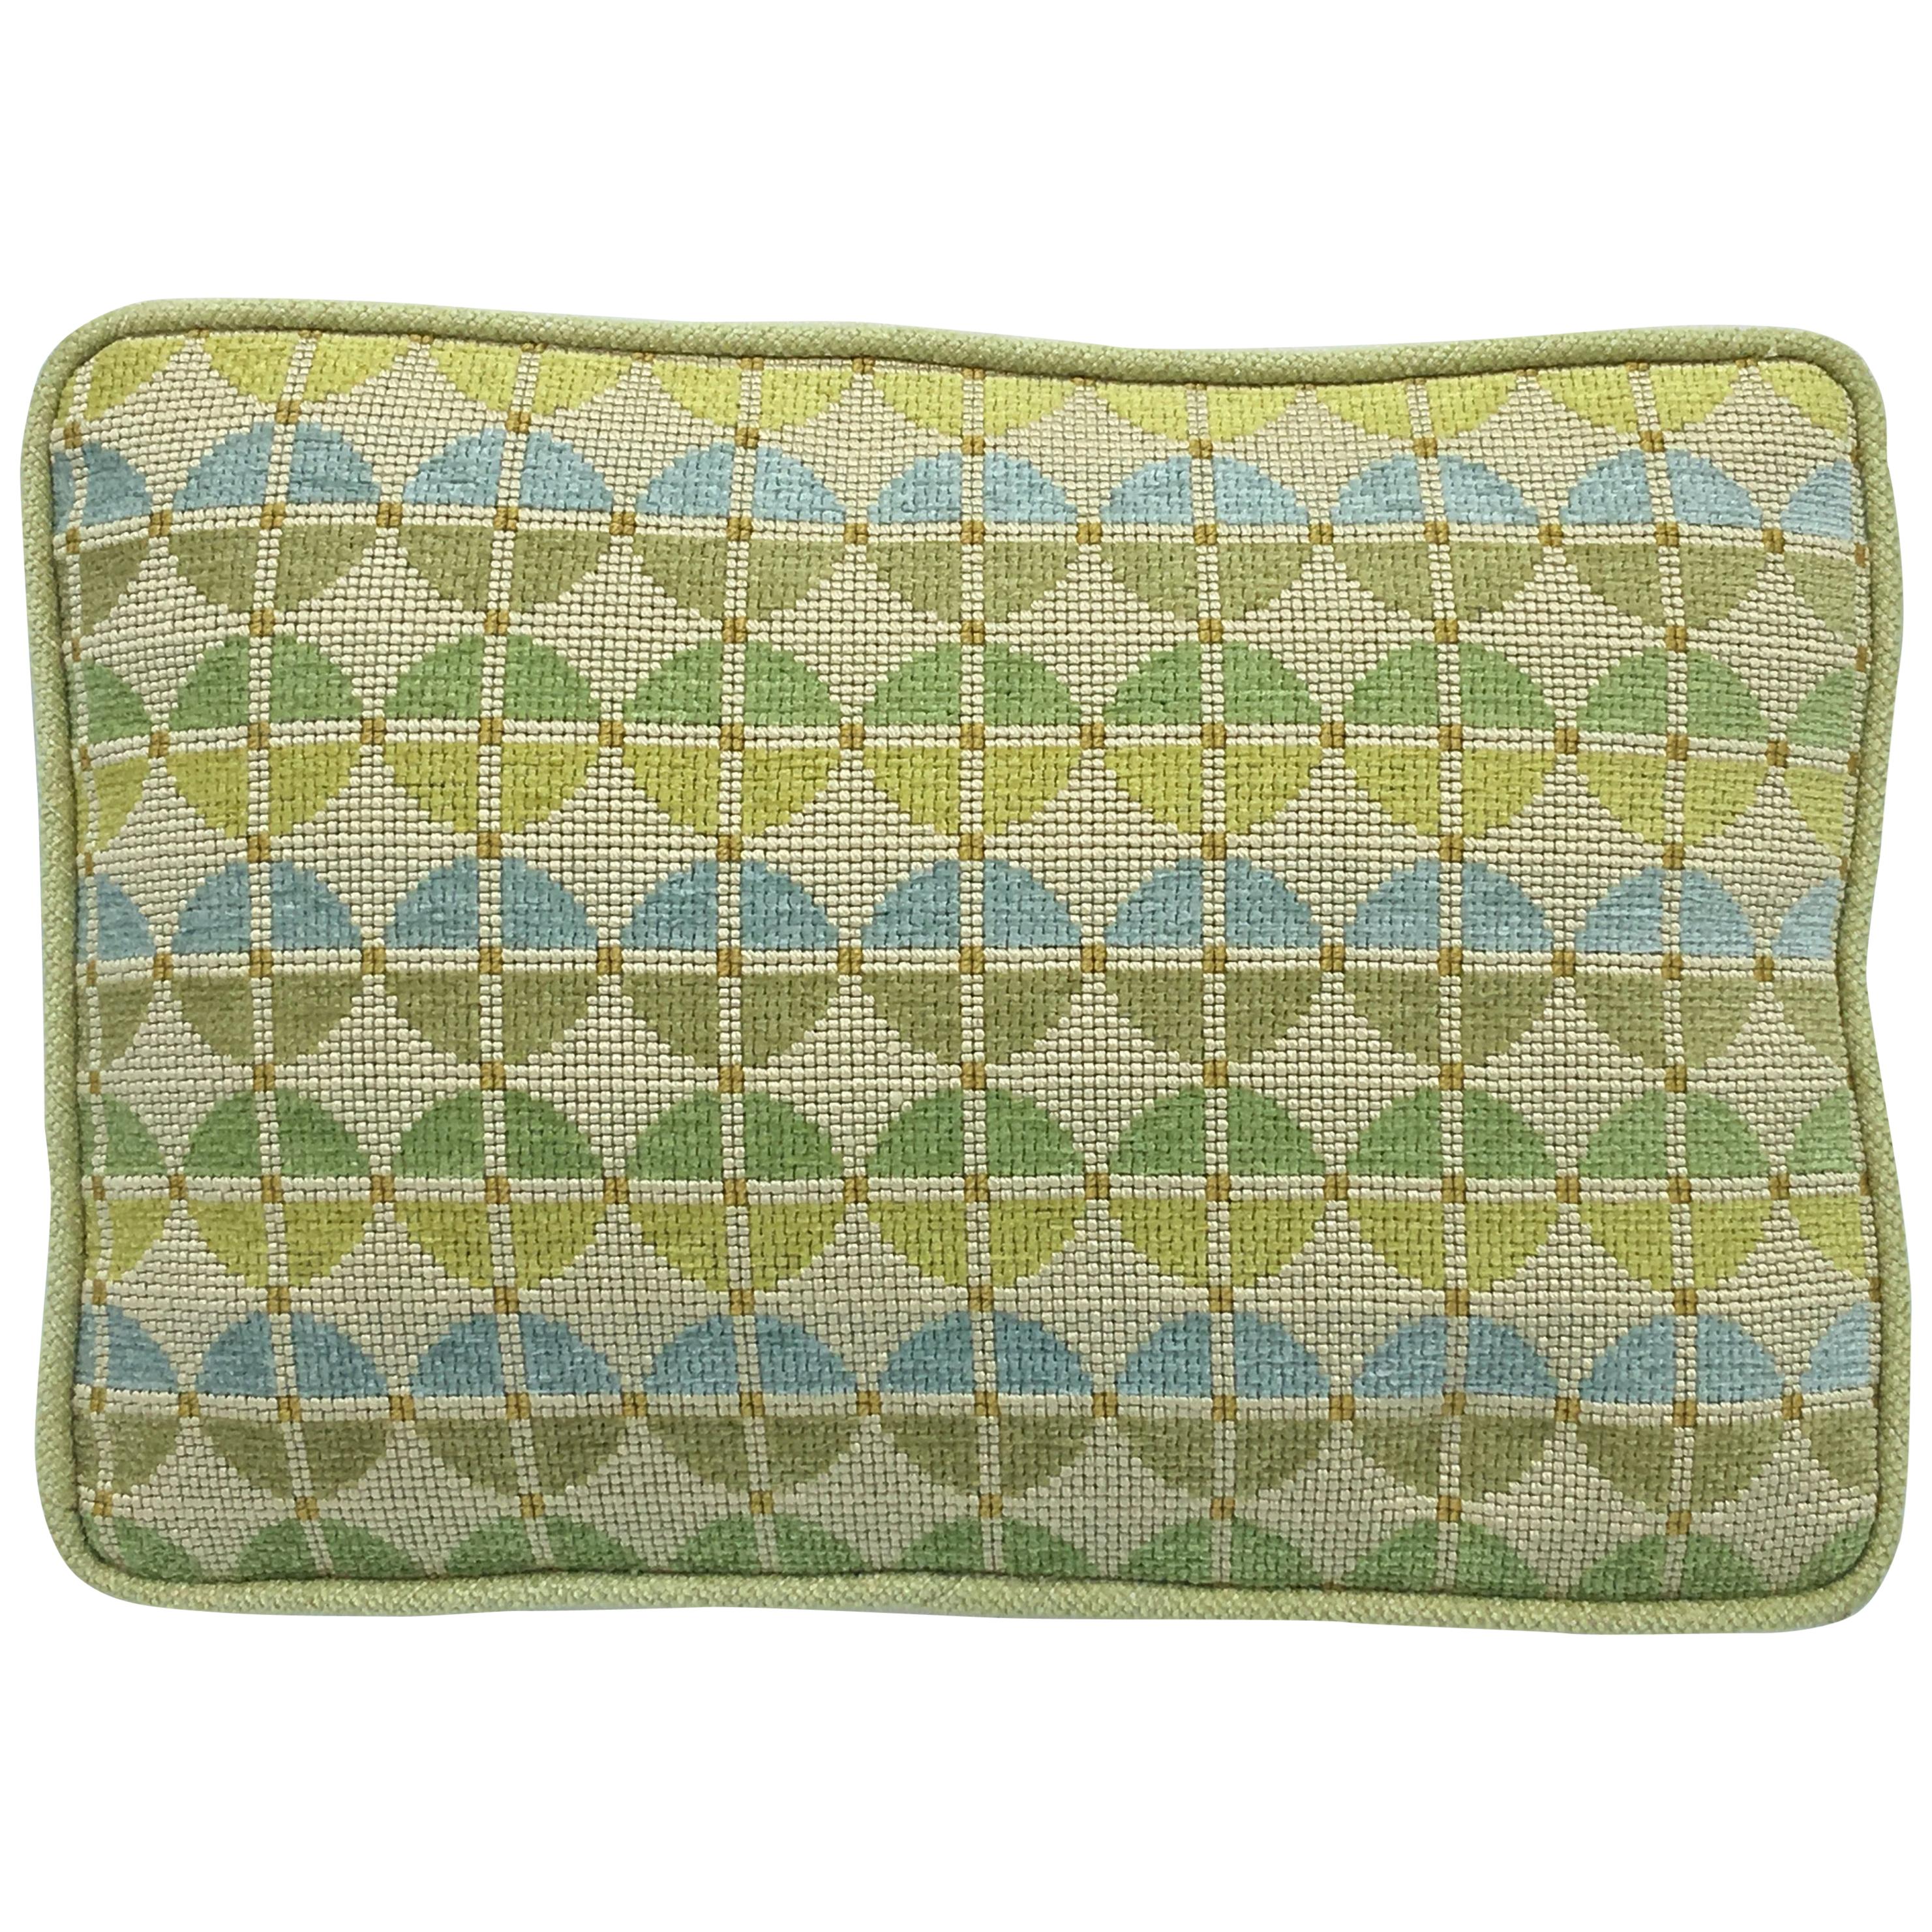 1970s Geometric Blue and Green Needlepoint Pillow with Linen Backing For Sale